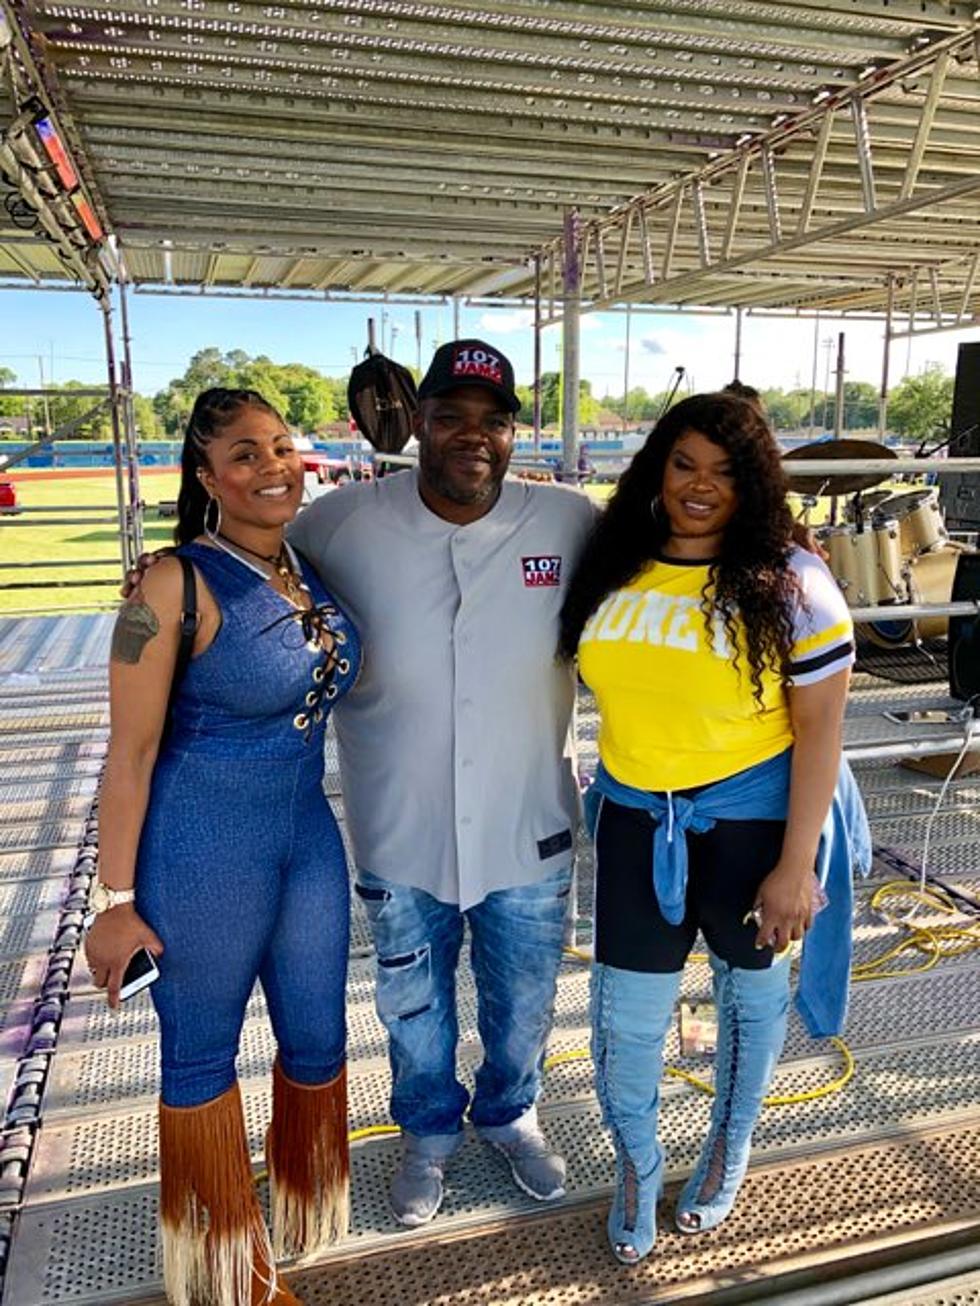 Big Shouts Out To The Organizers Of The Southern Soul Crawfish Festival This Weekend